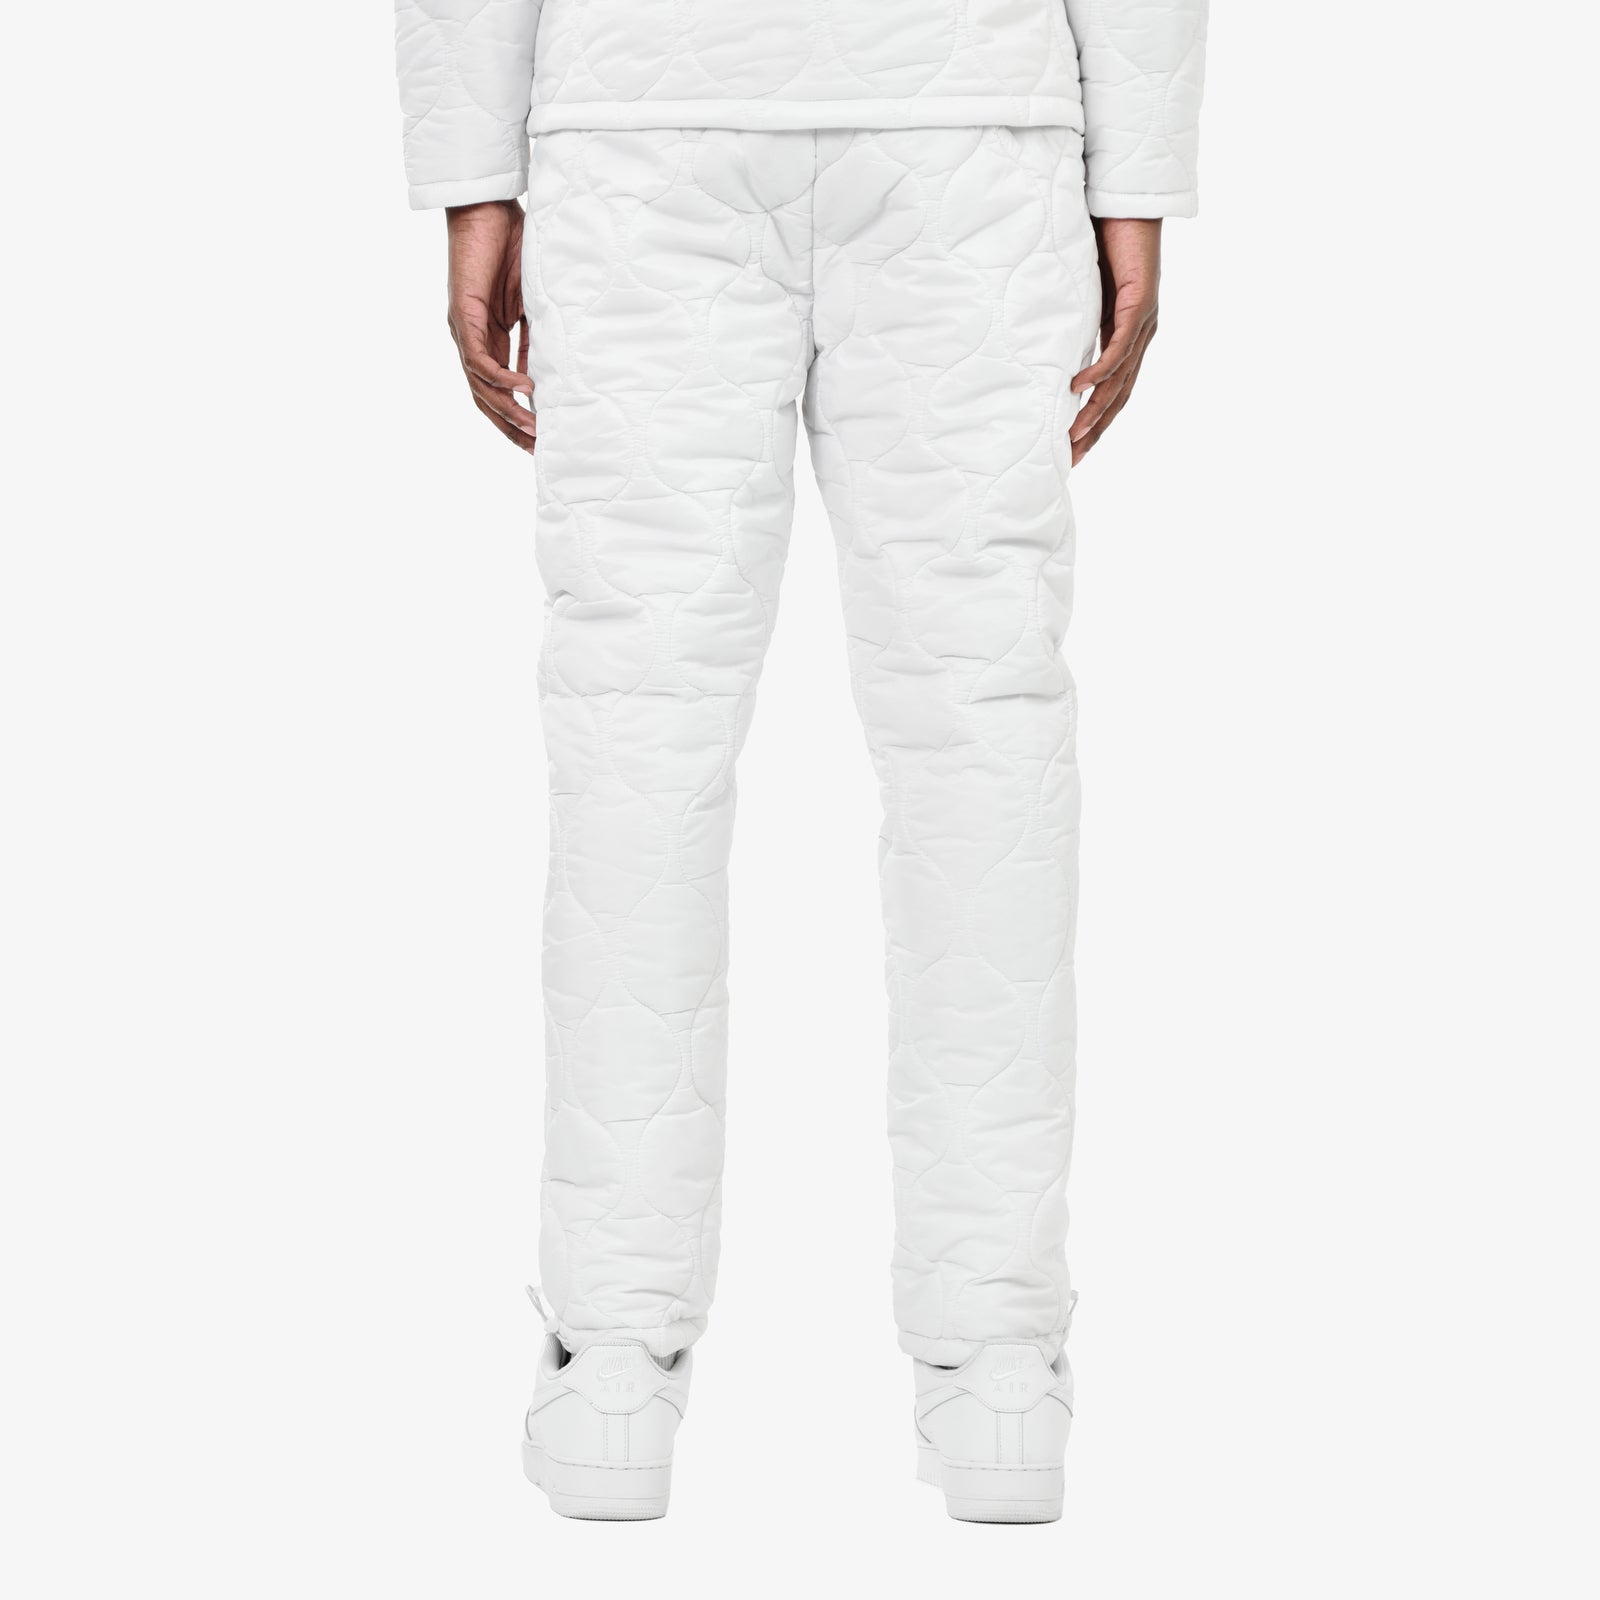 LIFE CODE WHITE QUILTED PANTS